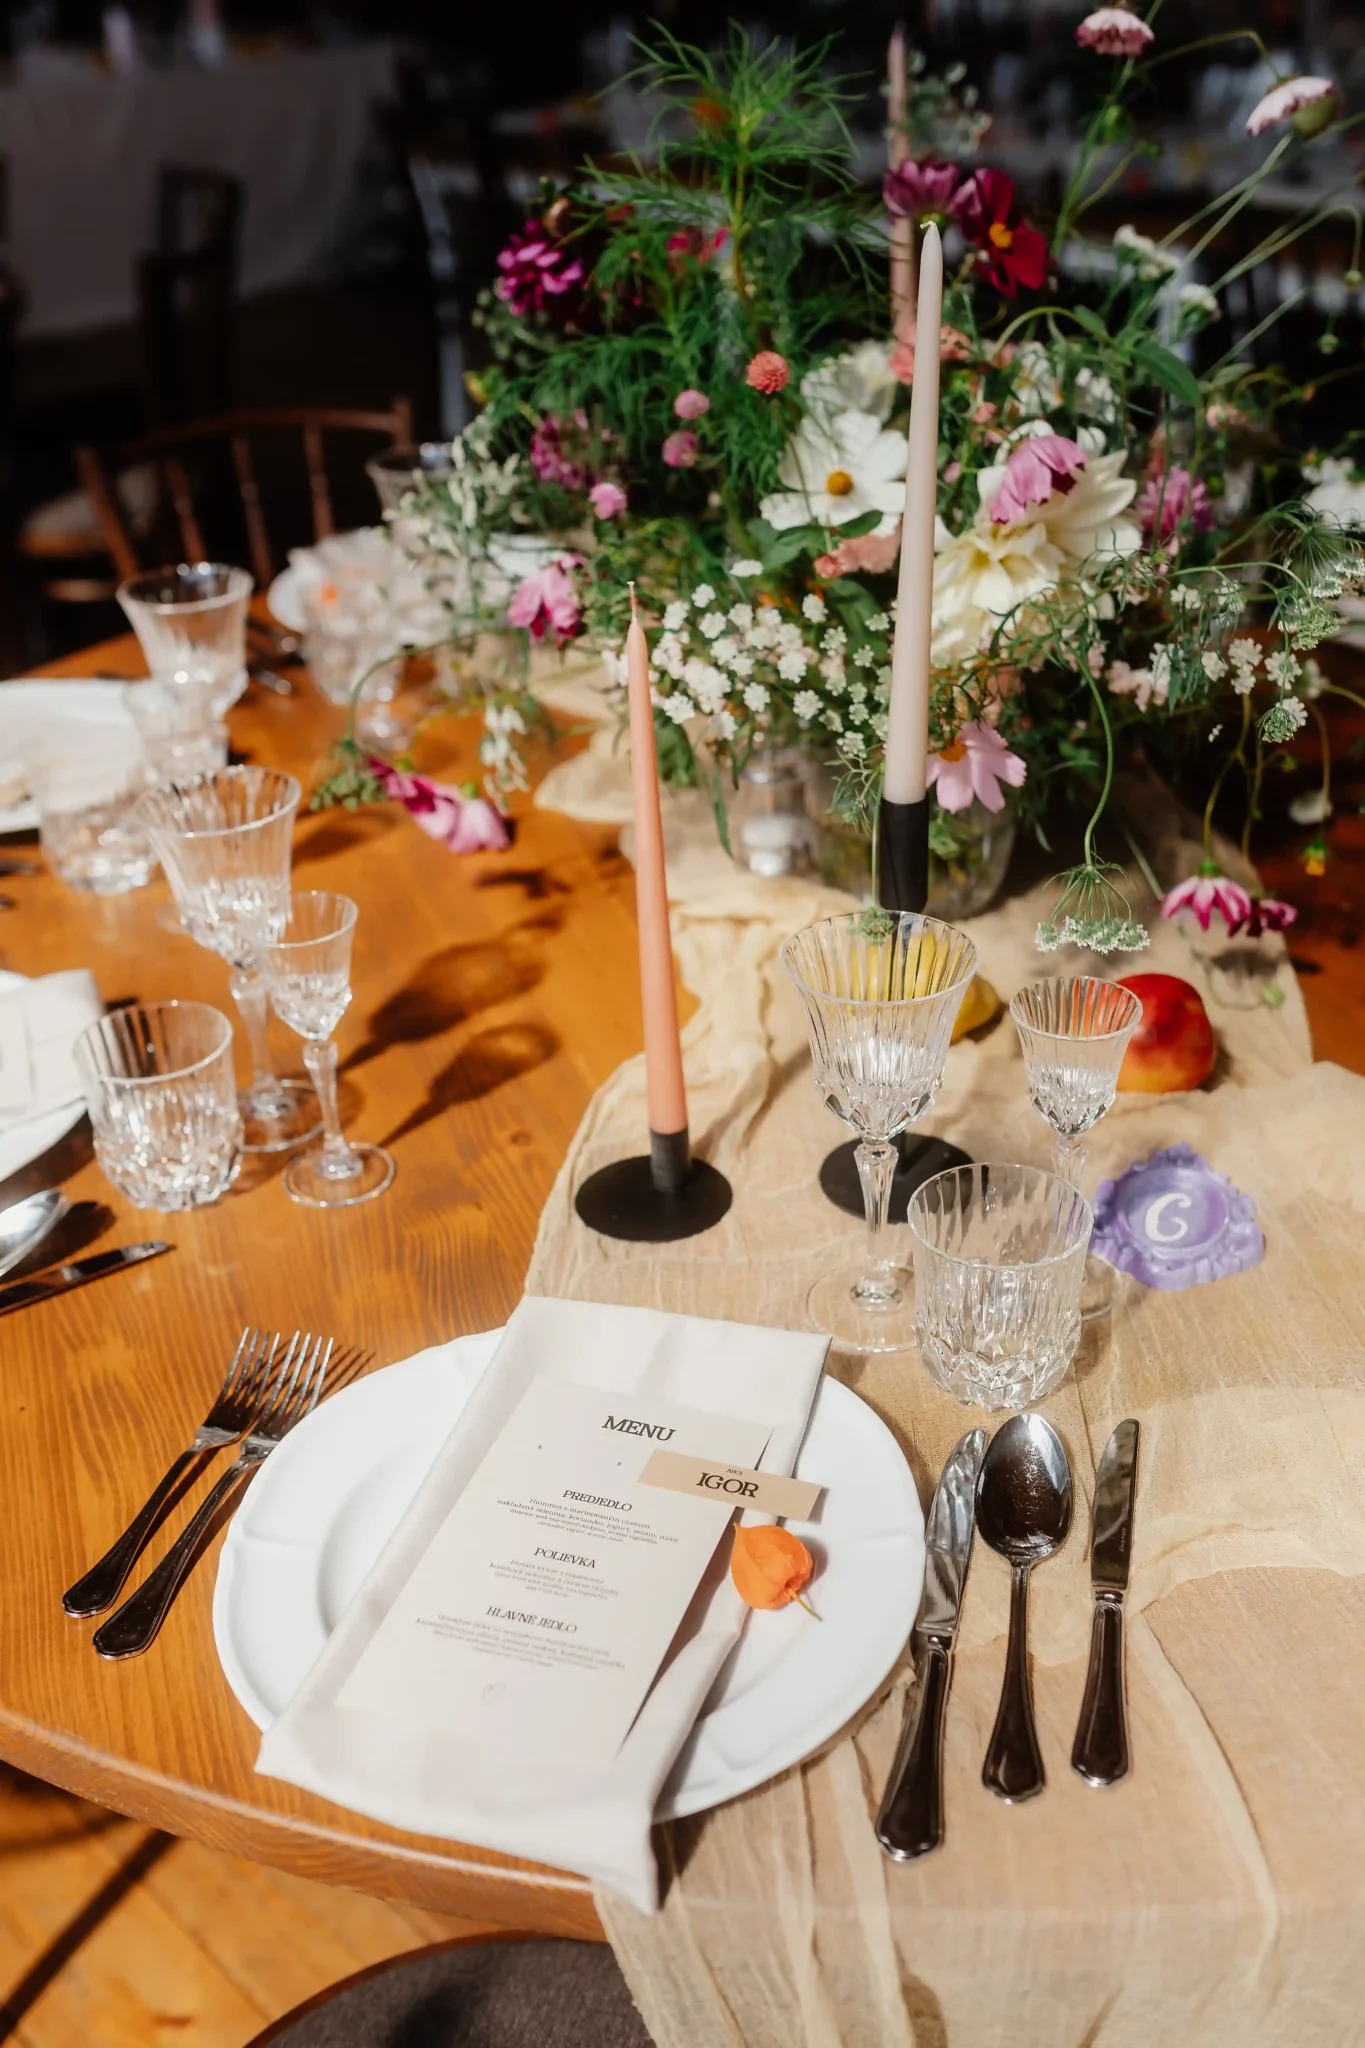 A table setting with flowers and place settings.